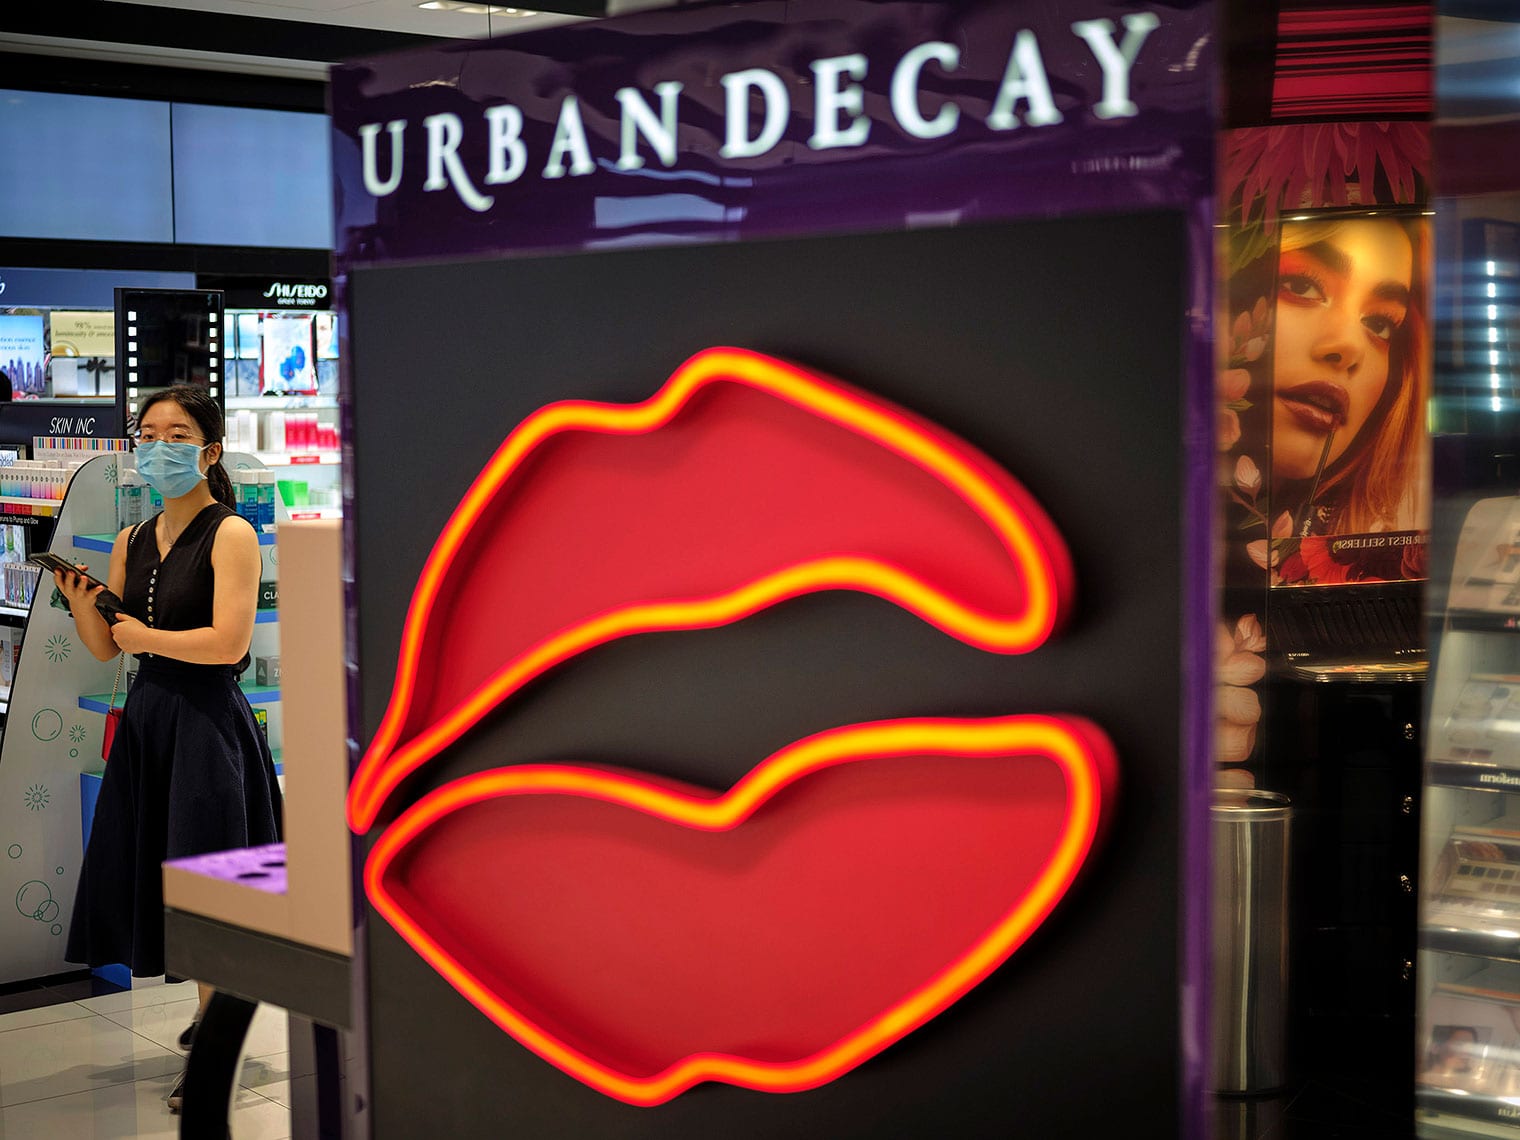 Sign with neon-outlined parted lips that reads "Urban Decay" at entrance to Sephora store, with masked woman in background looking at the camera